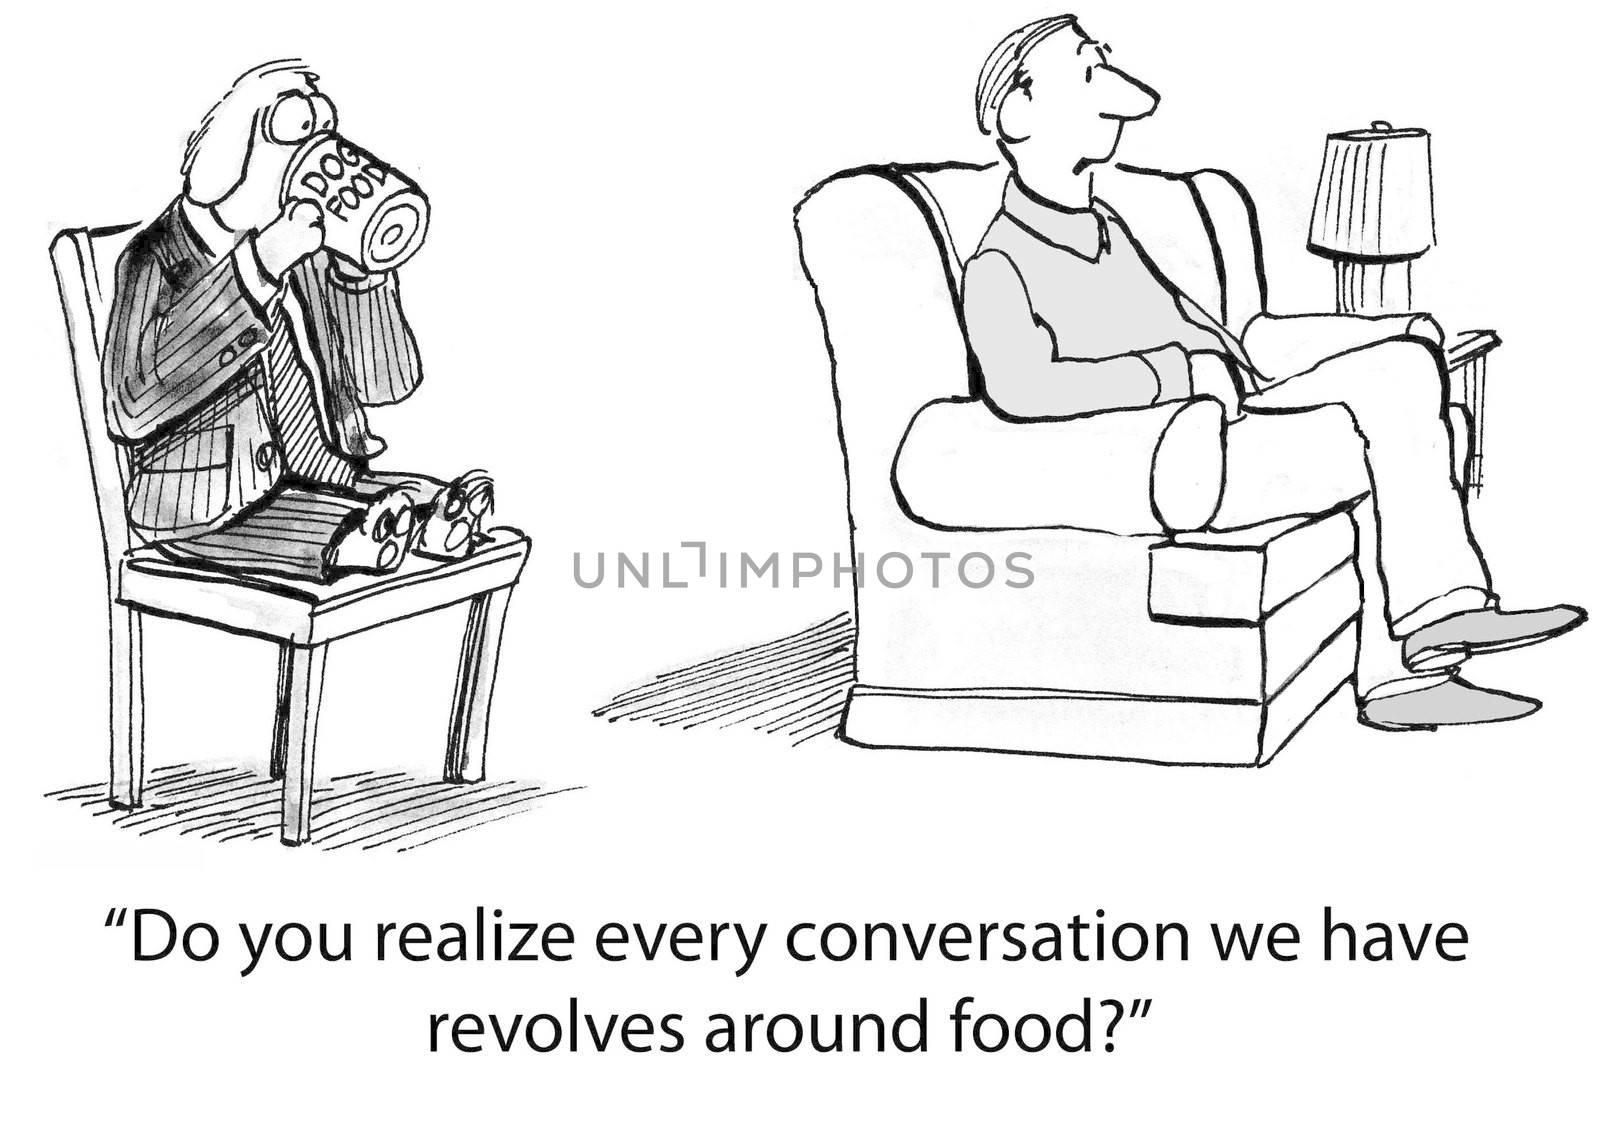 "Do you realize every conversation we have revolves around food?"